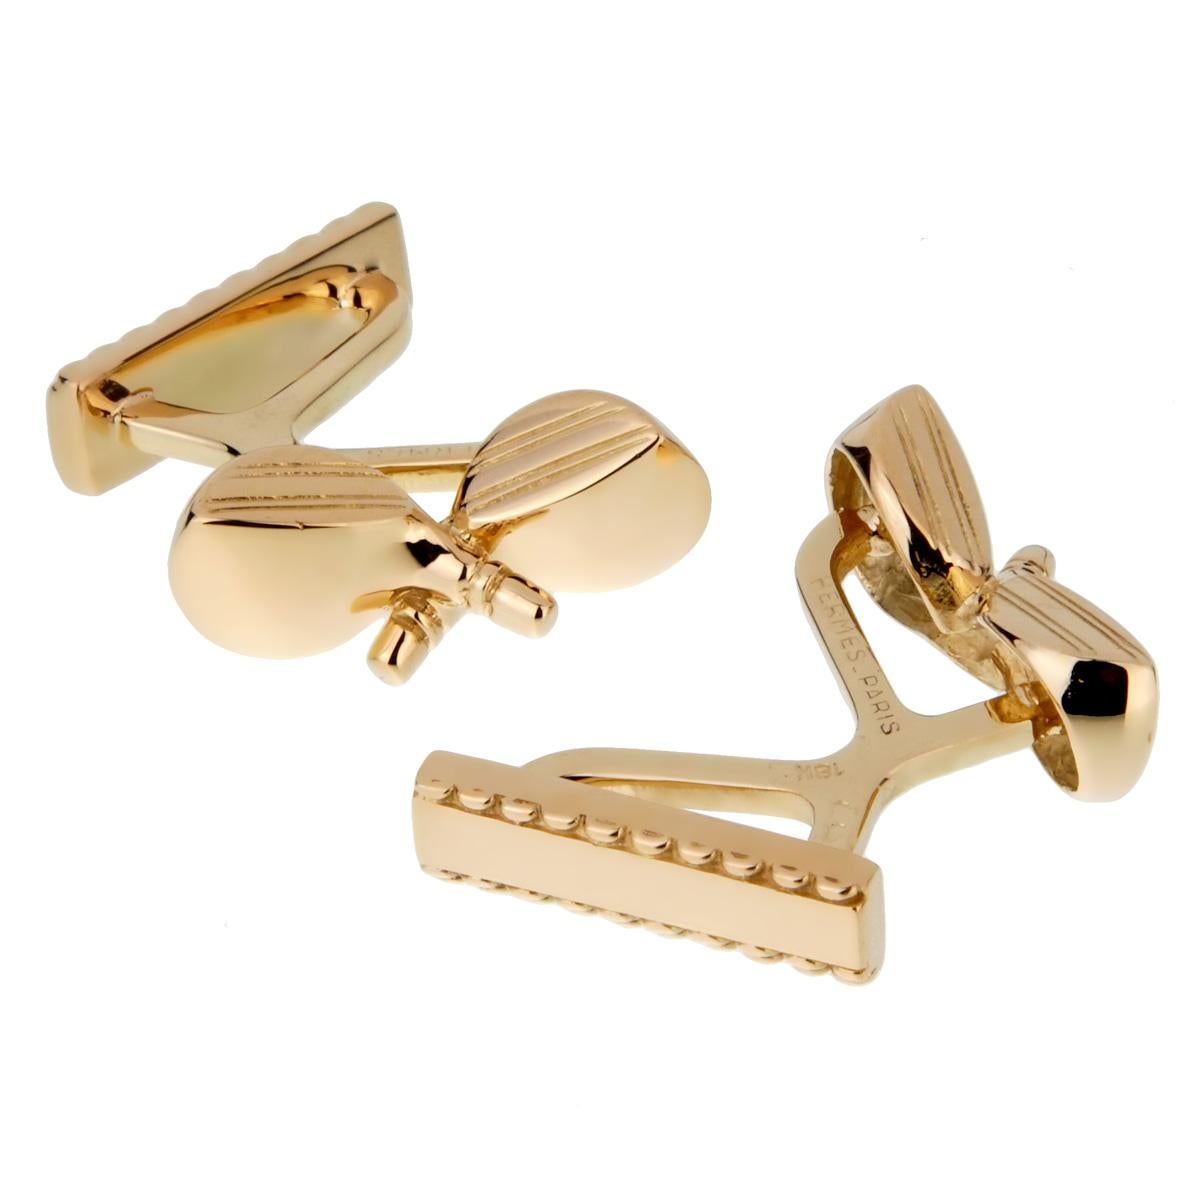 A fabulous pair of Hermes Paris yellow gold cuff links crafted in 18k yellow gold. The cuff links have a weight of 15.8 grams.

